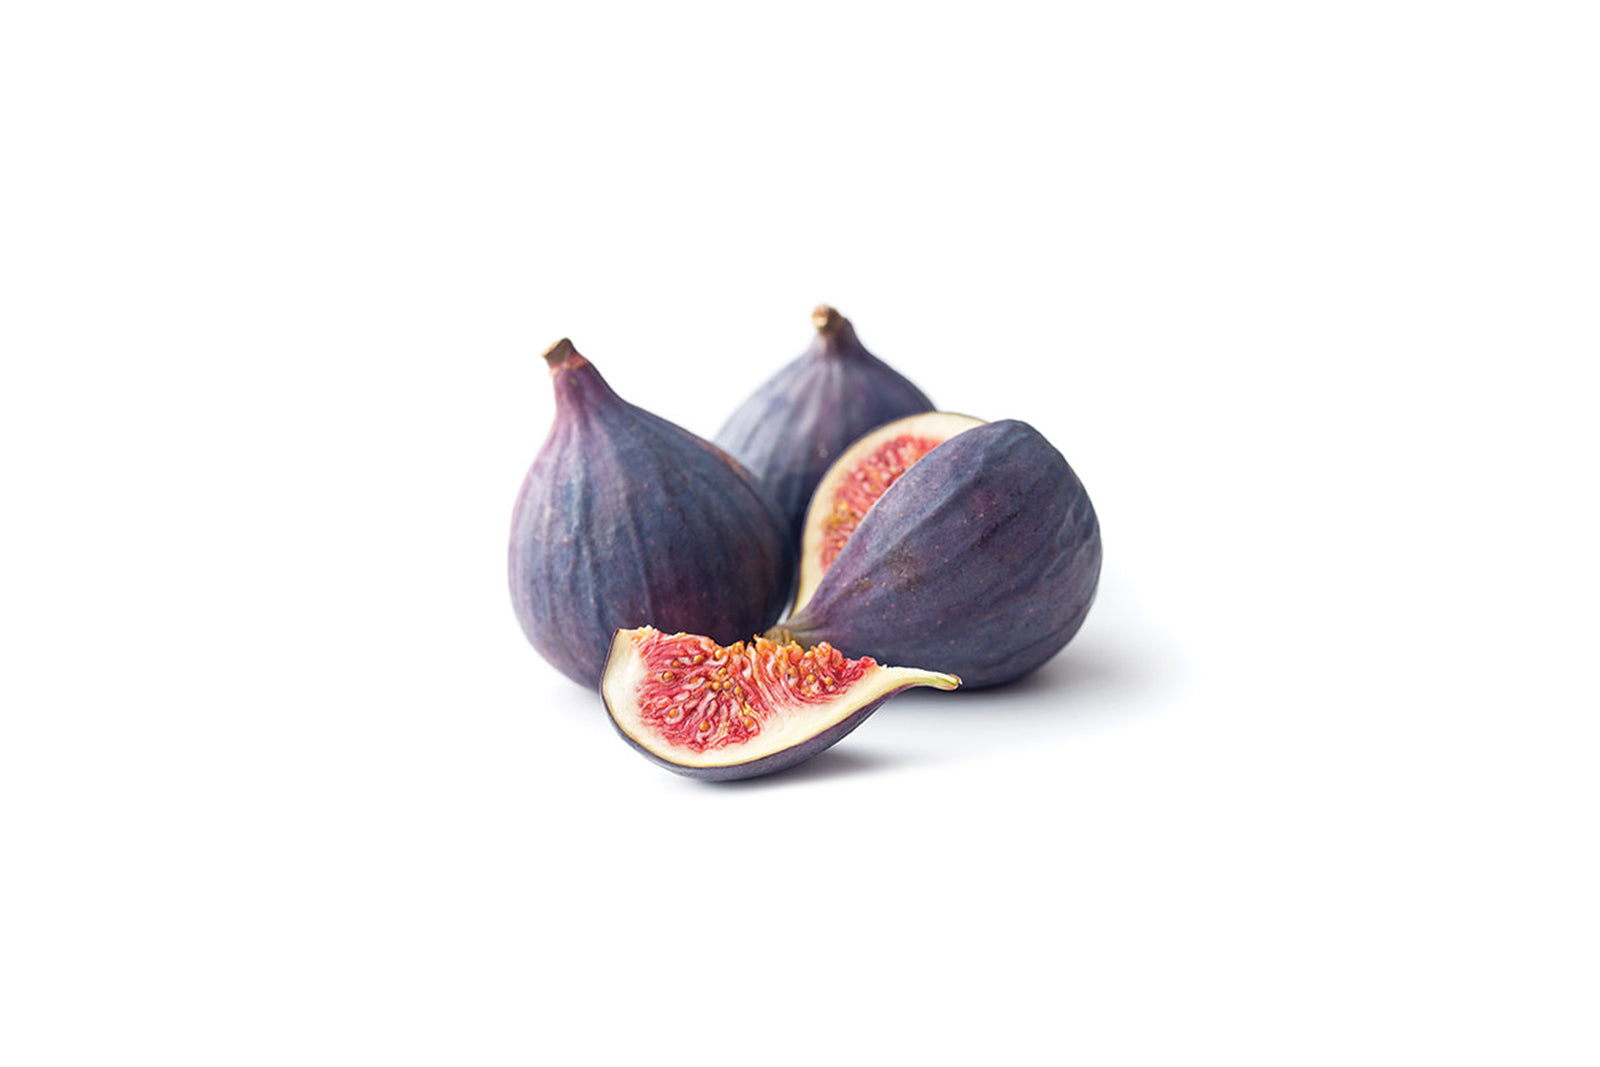 Fresh Veggies Fruits Vegetables Online Delivery Singapore Wholesale Fruits Vegetables for Cafes Hawkers and Restaurant - Figs 无花果